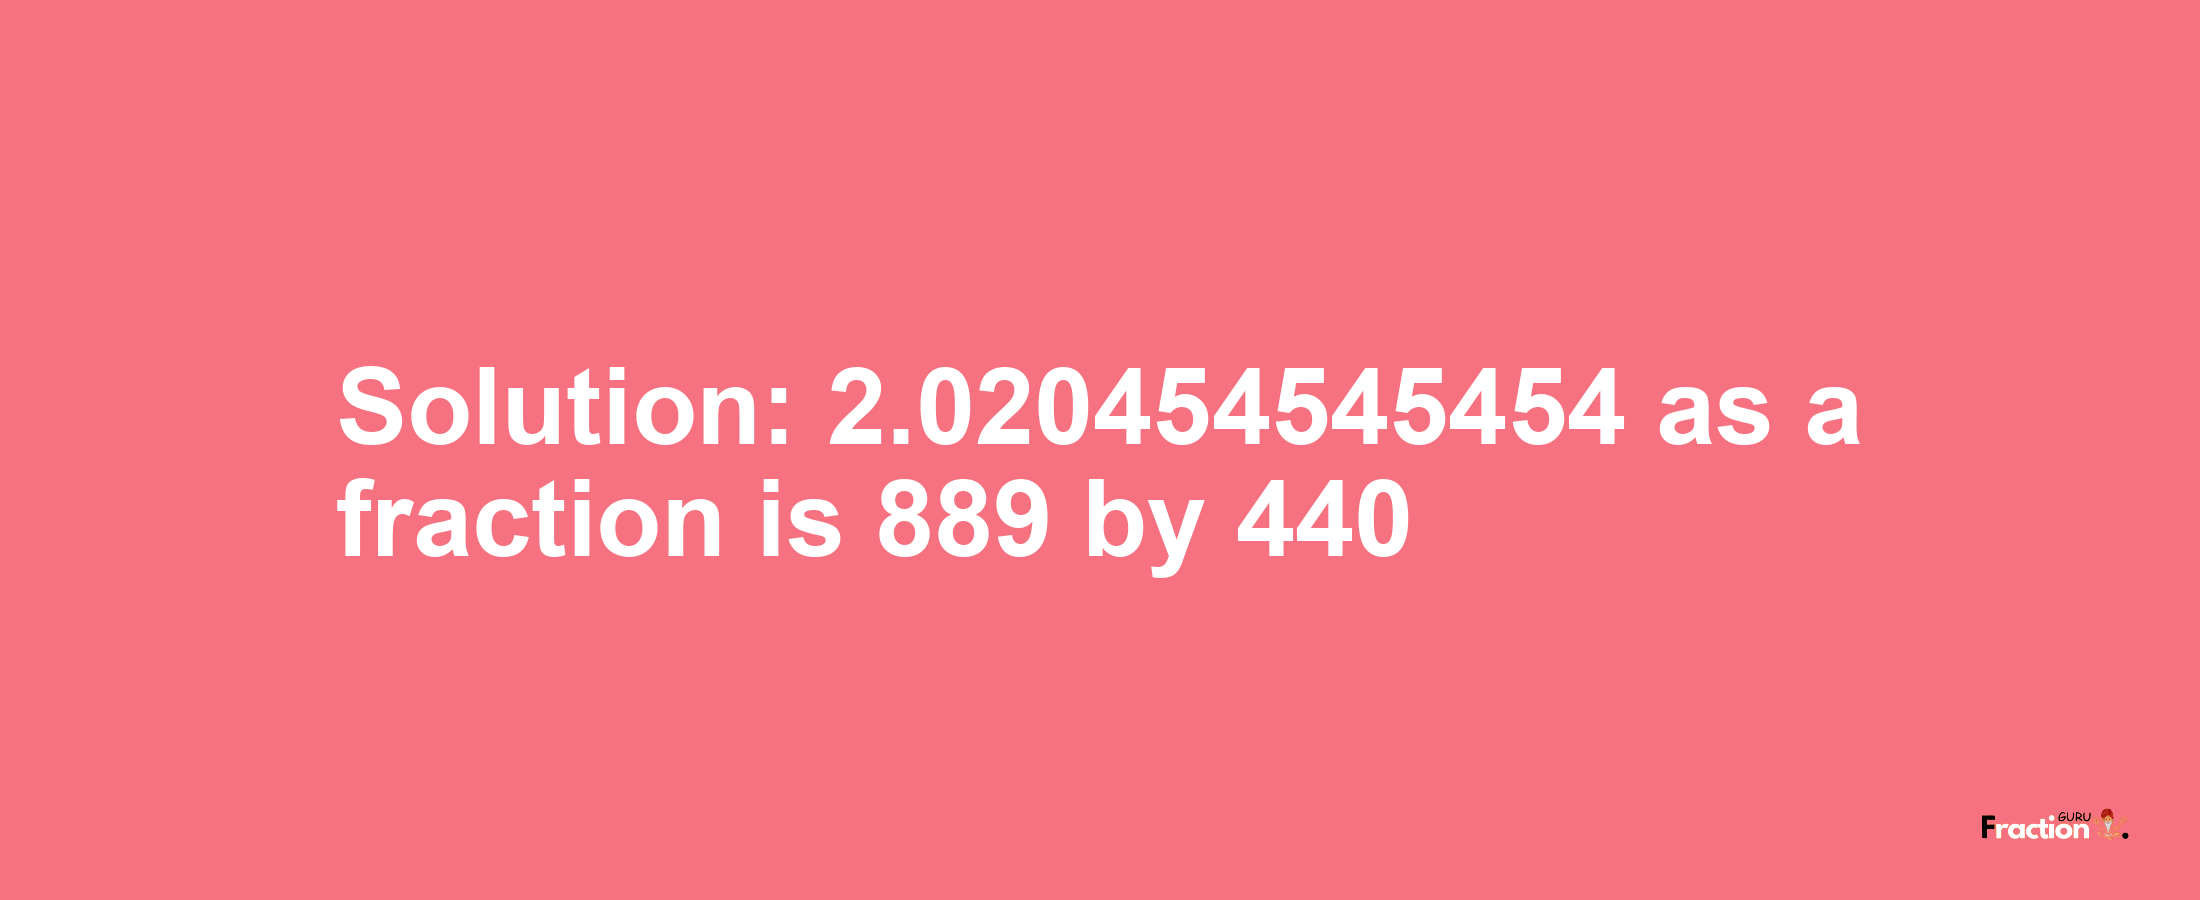 Solution:2.020454545454 as a fraction is 889/440